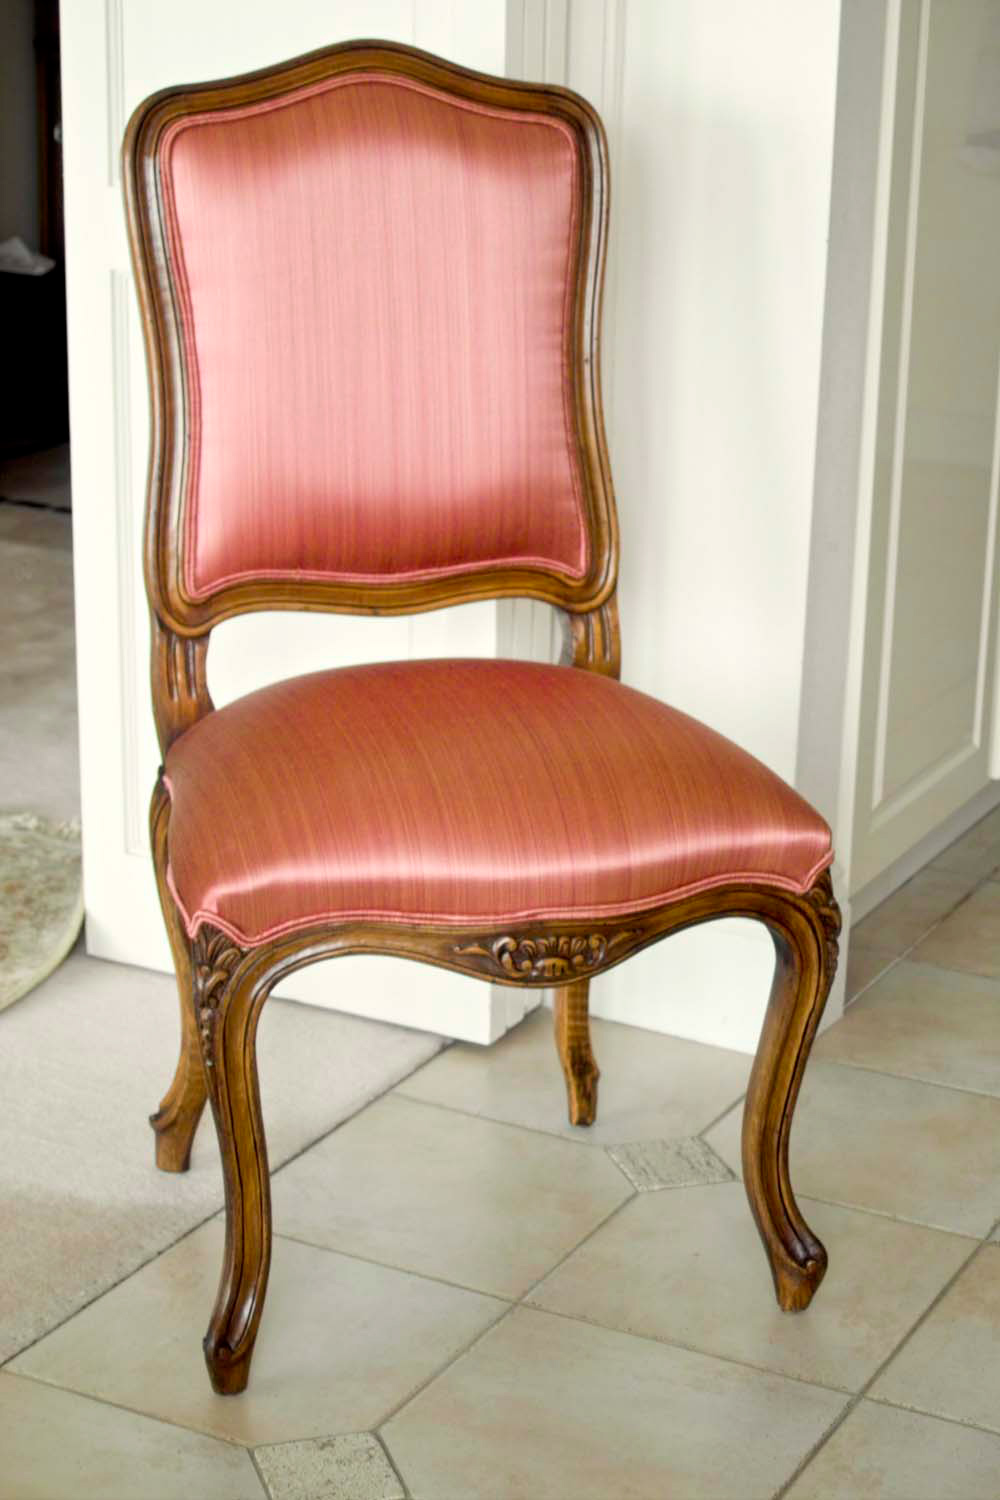 20 French provincial and classical custom made furniture